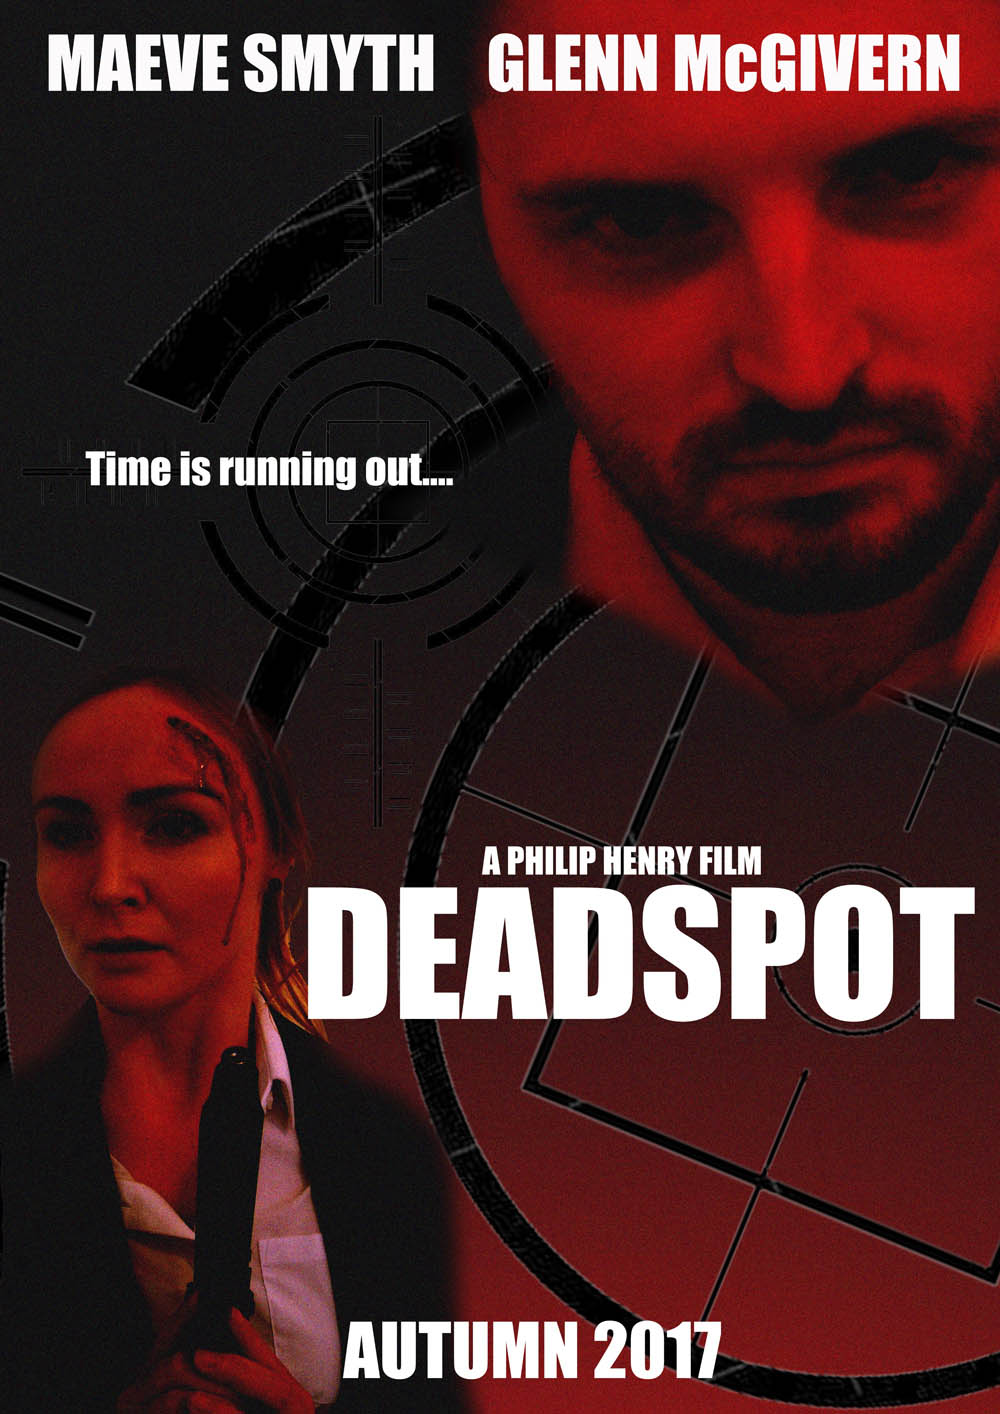 Deadspot poster design by Philip Henry